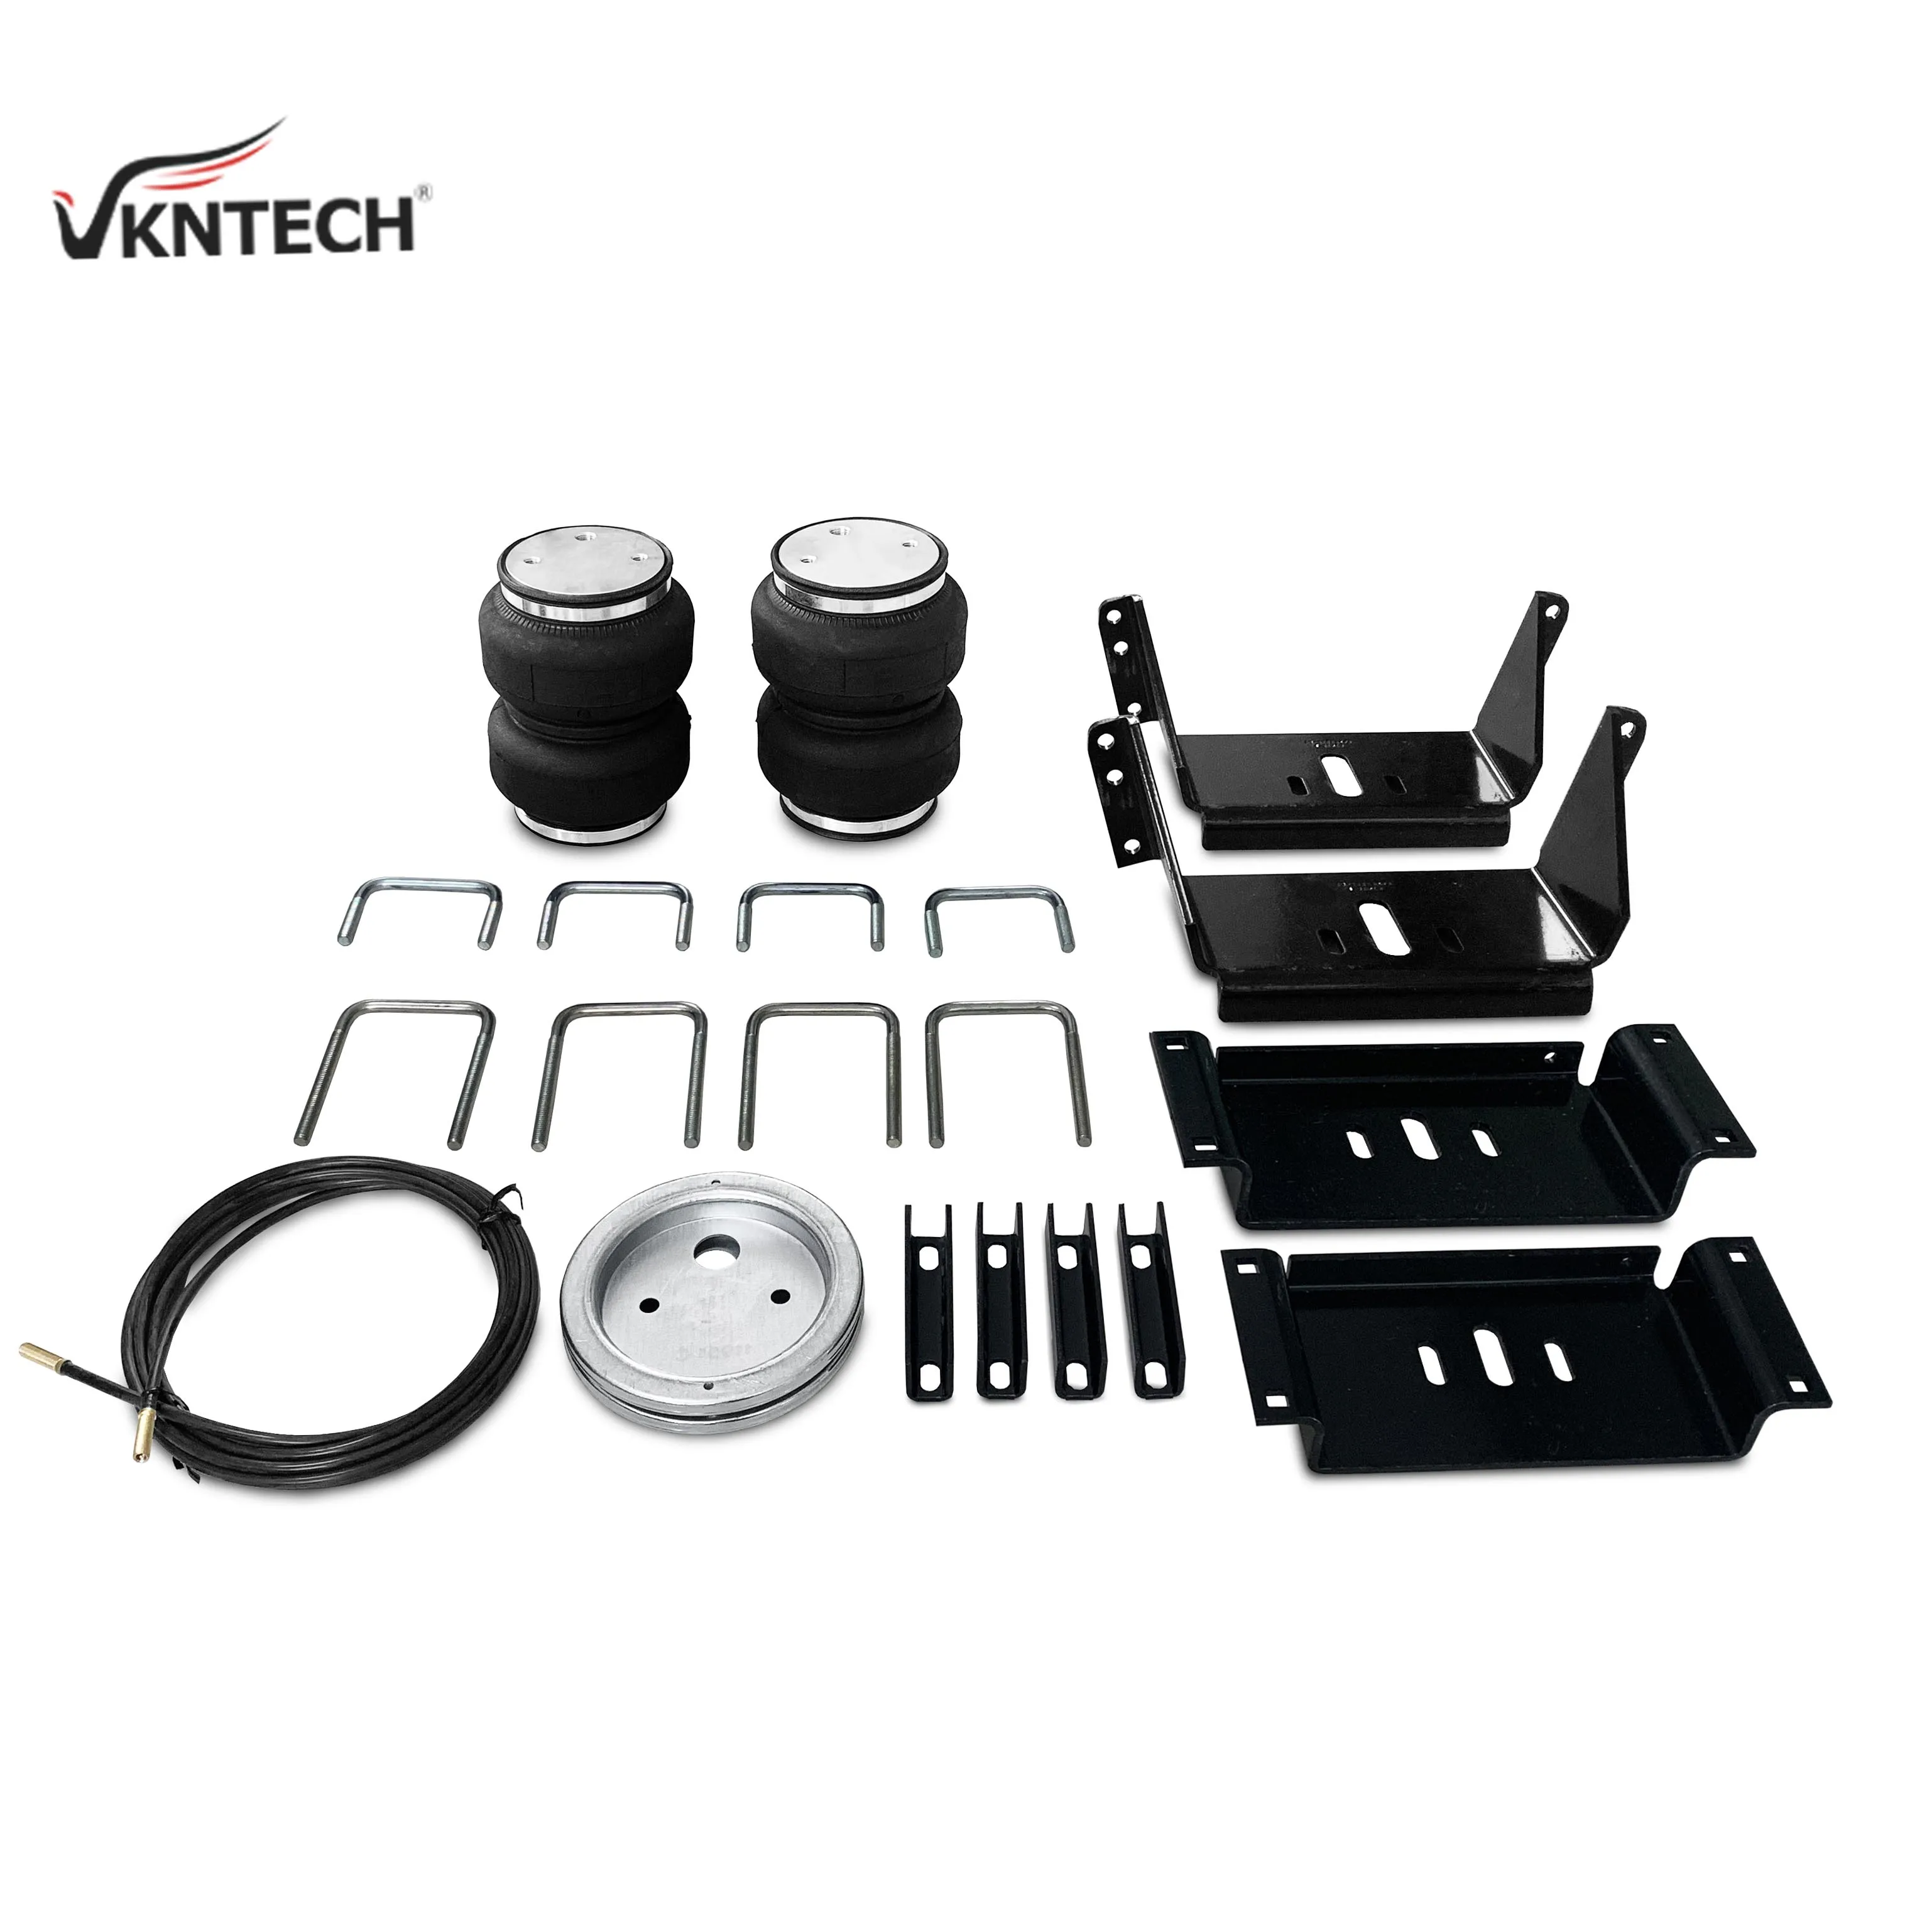 Air Lift 88215 Load Lifter 5000 Ultimate Air Spring Kit With Internal  Jounce Bumper Universal Air Bags - Buy Air Spring,Universal Air Bag,Air  Lift Product on Alibaba.com